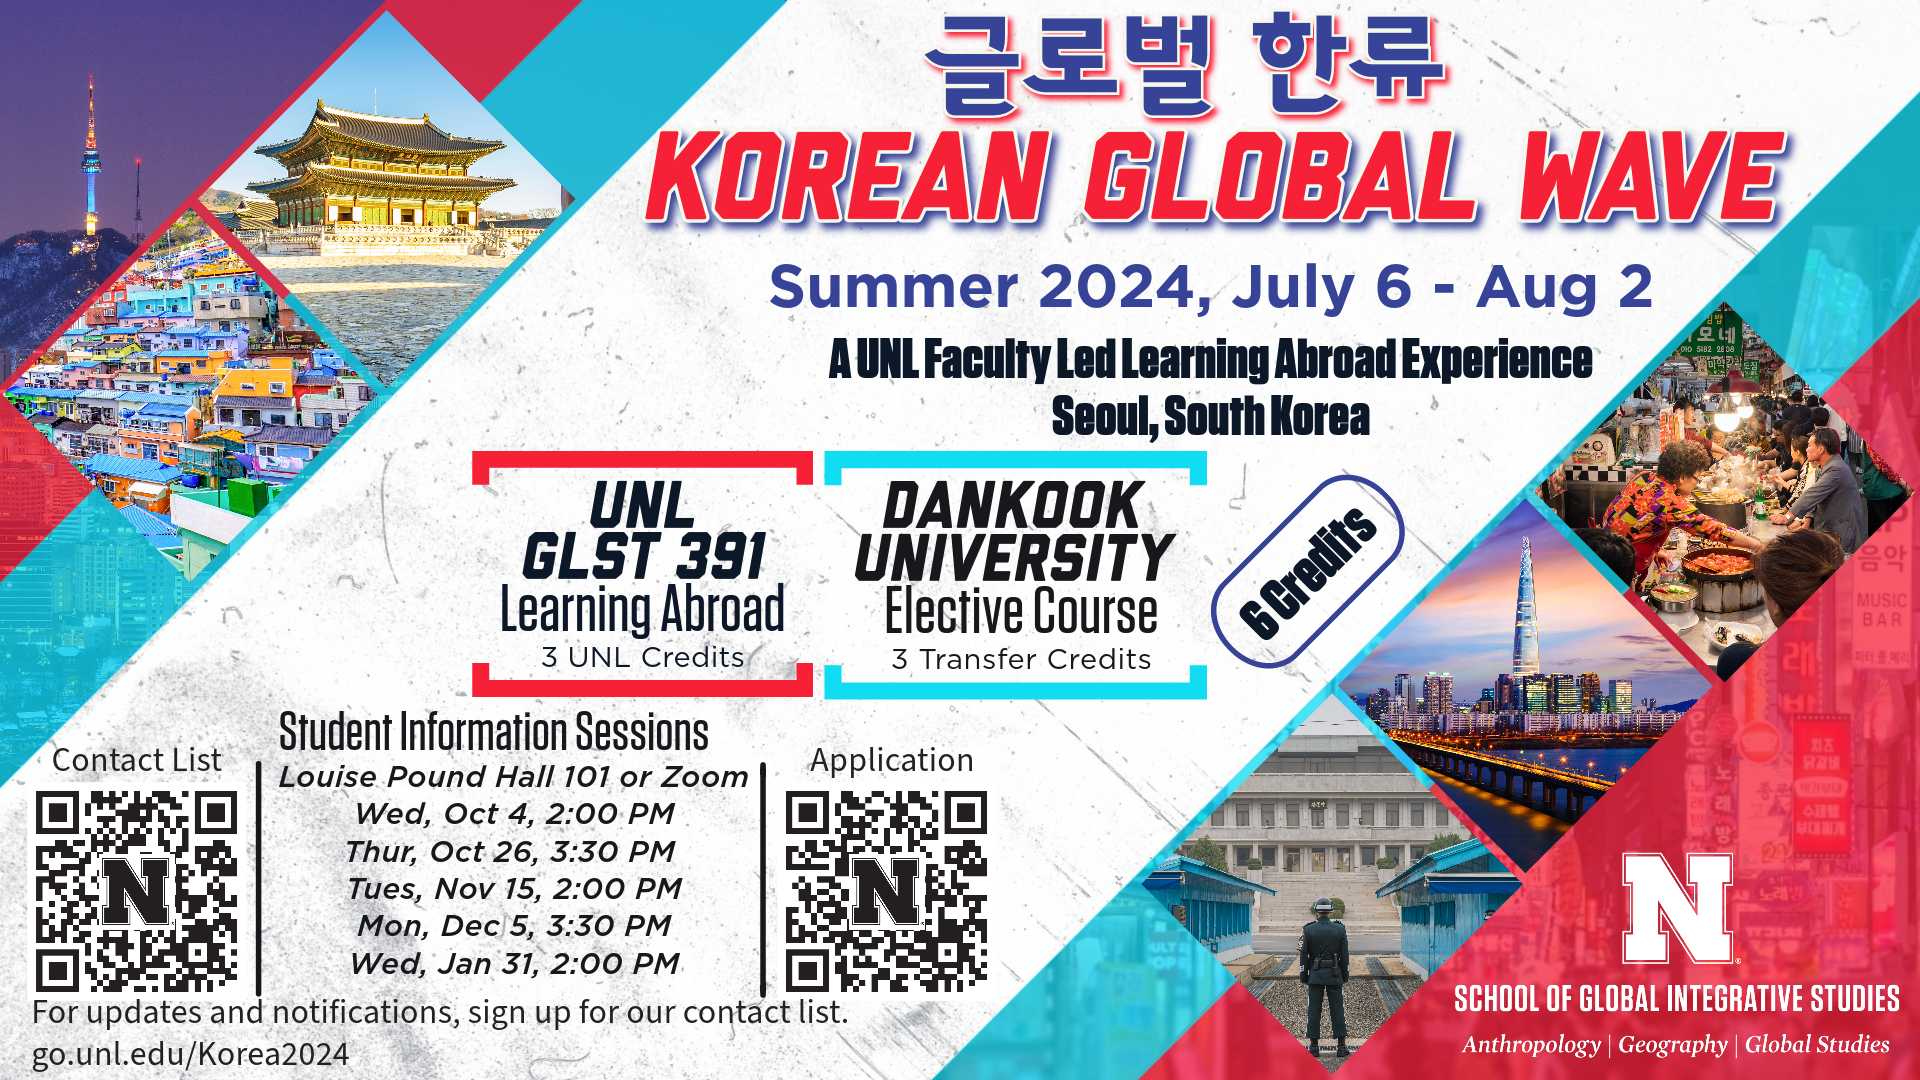 Korean Global Wave Info Session - Oct 4, 2pm